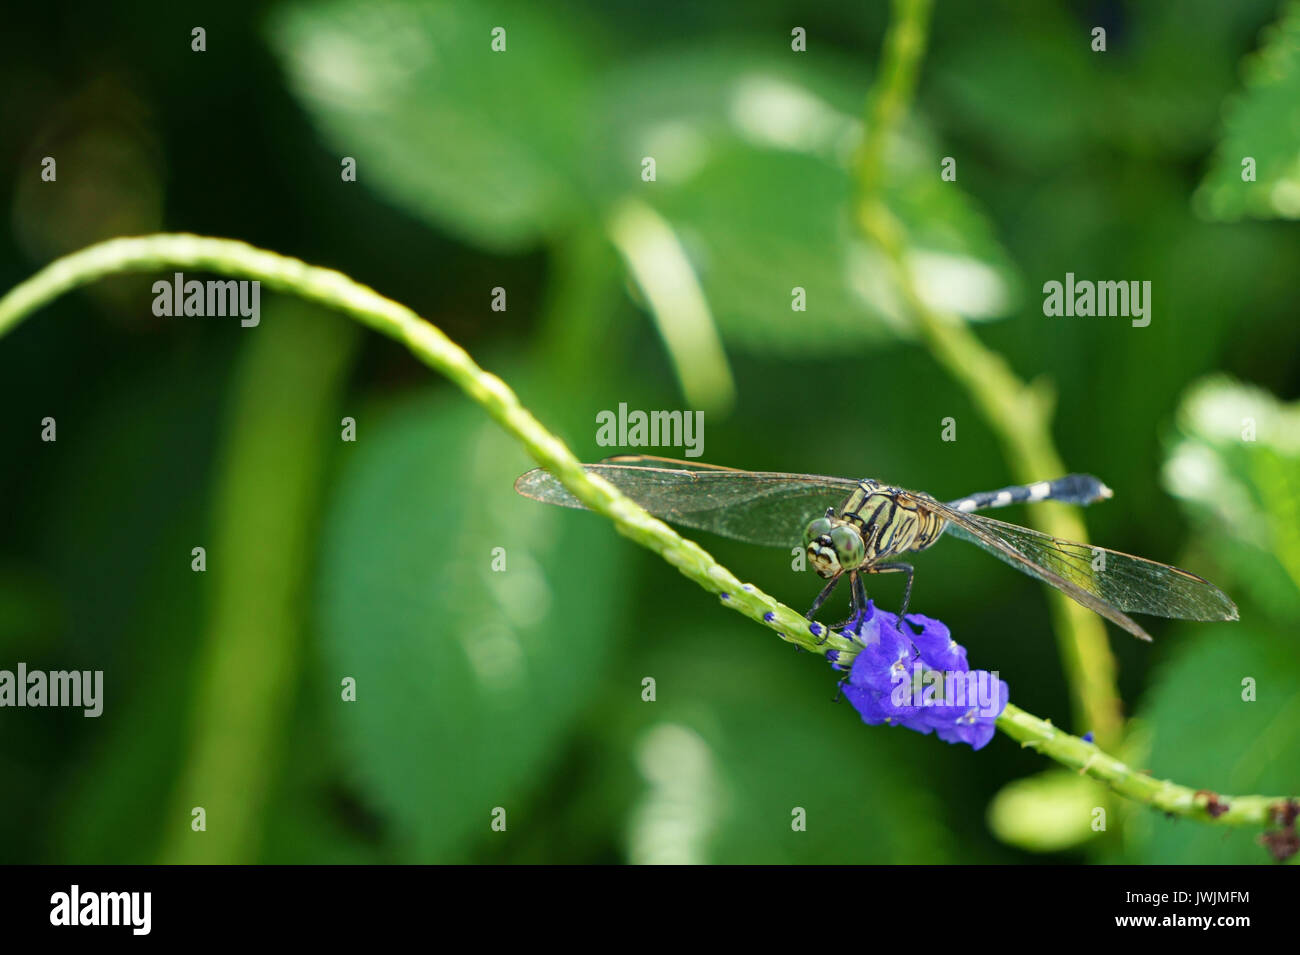 Dragonfly (Anisoptera) with purple flowers Stock Photo